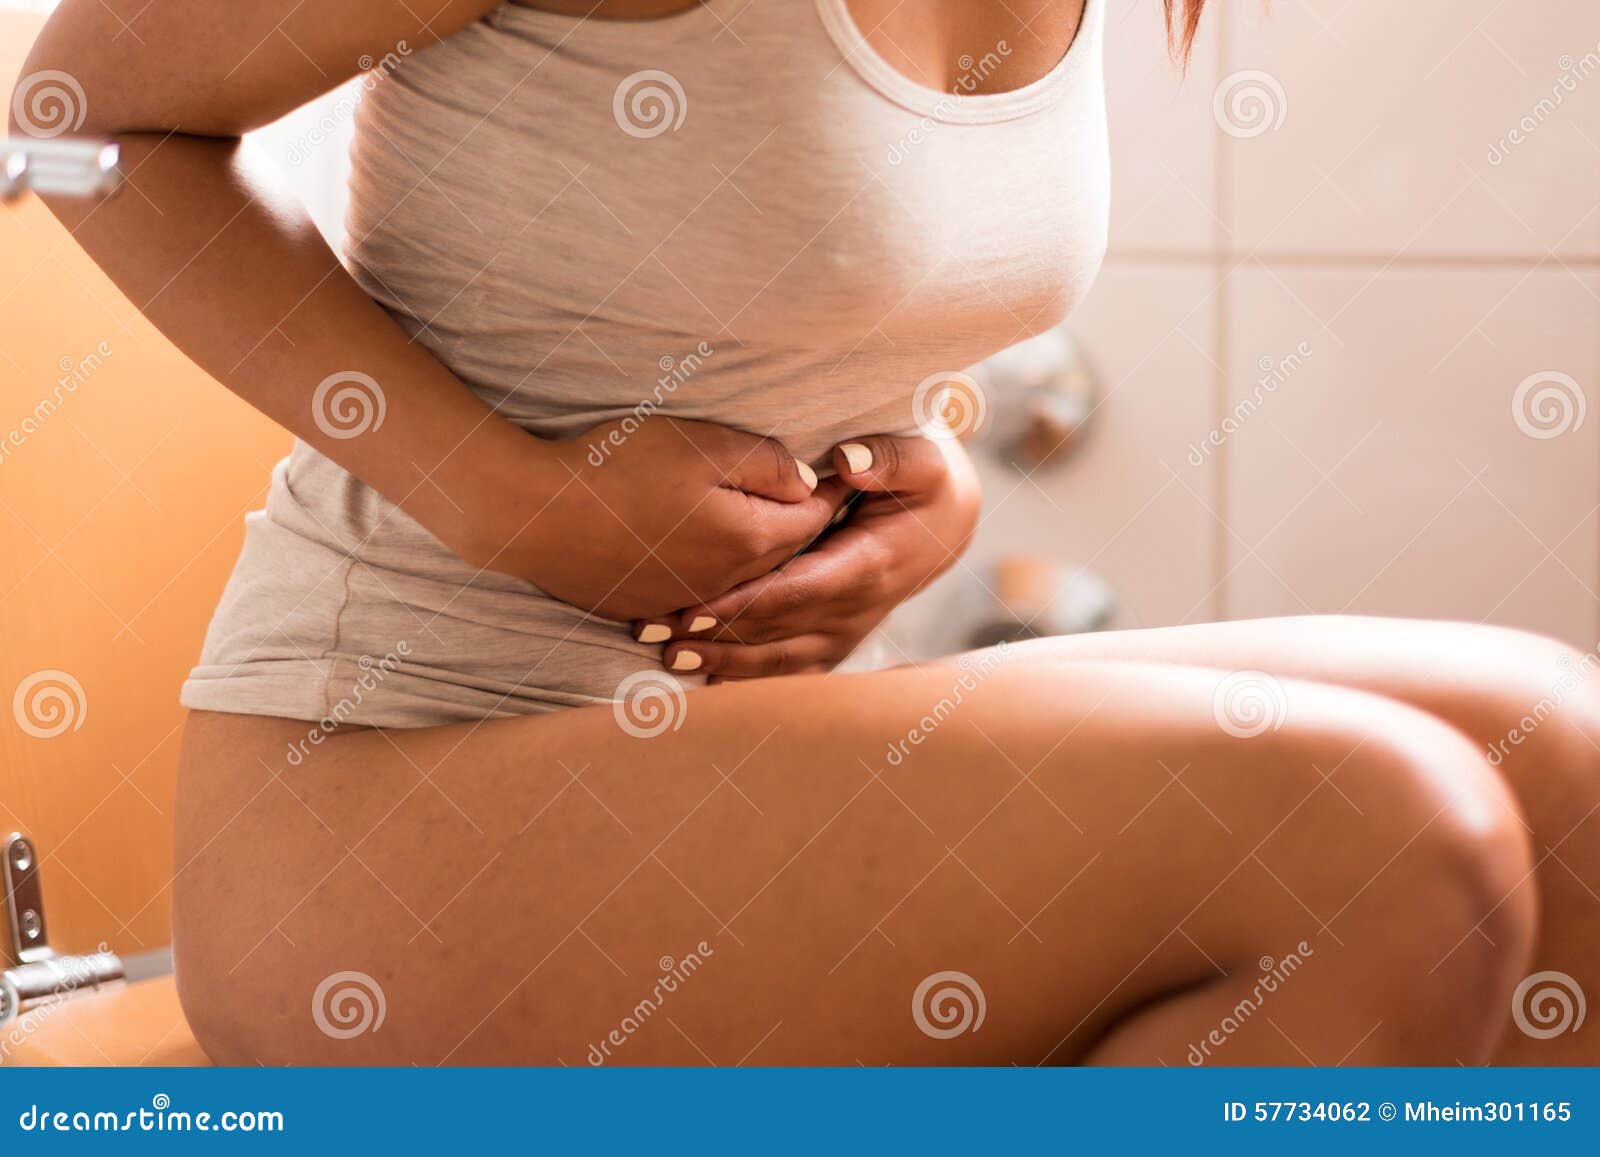 Stomach Images & Stock Pictures. Royalty Free Stomach ...